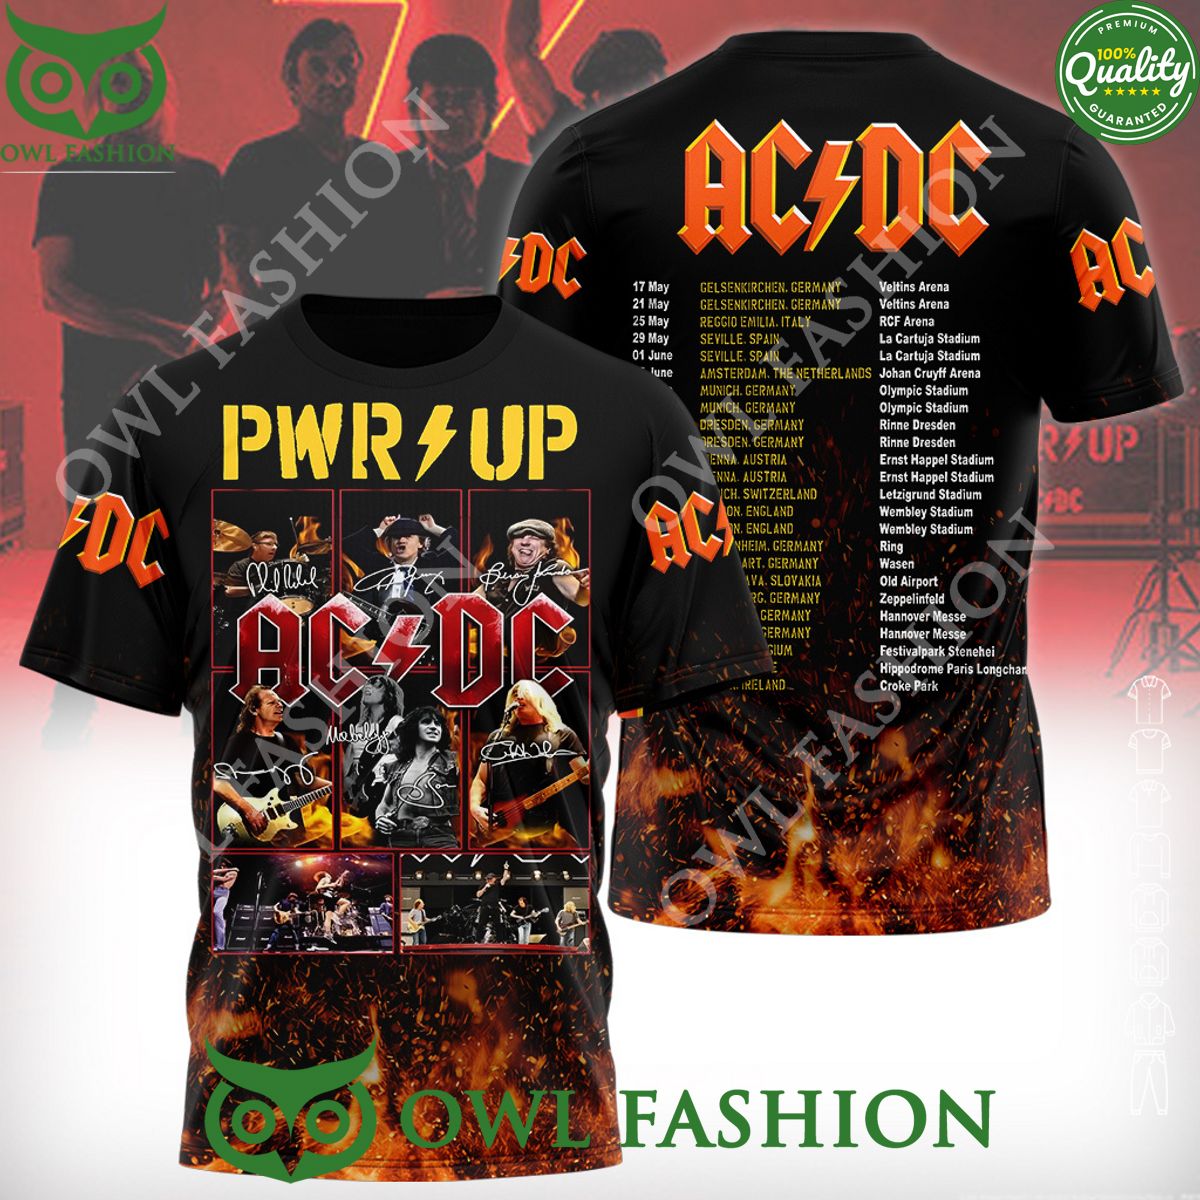 ACDC Power Up Album Tour 3D T Shirt Nice bread, I like it